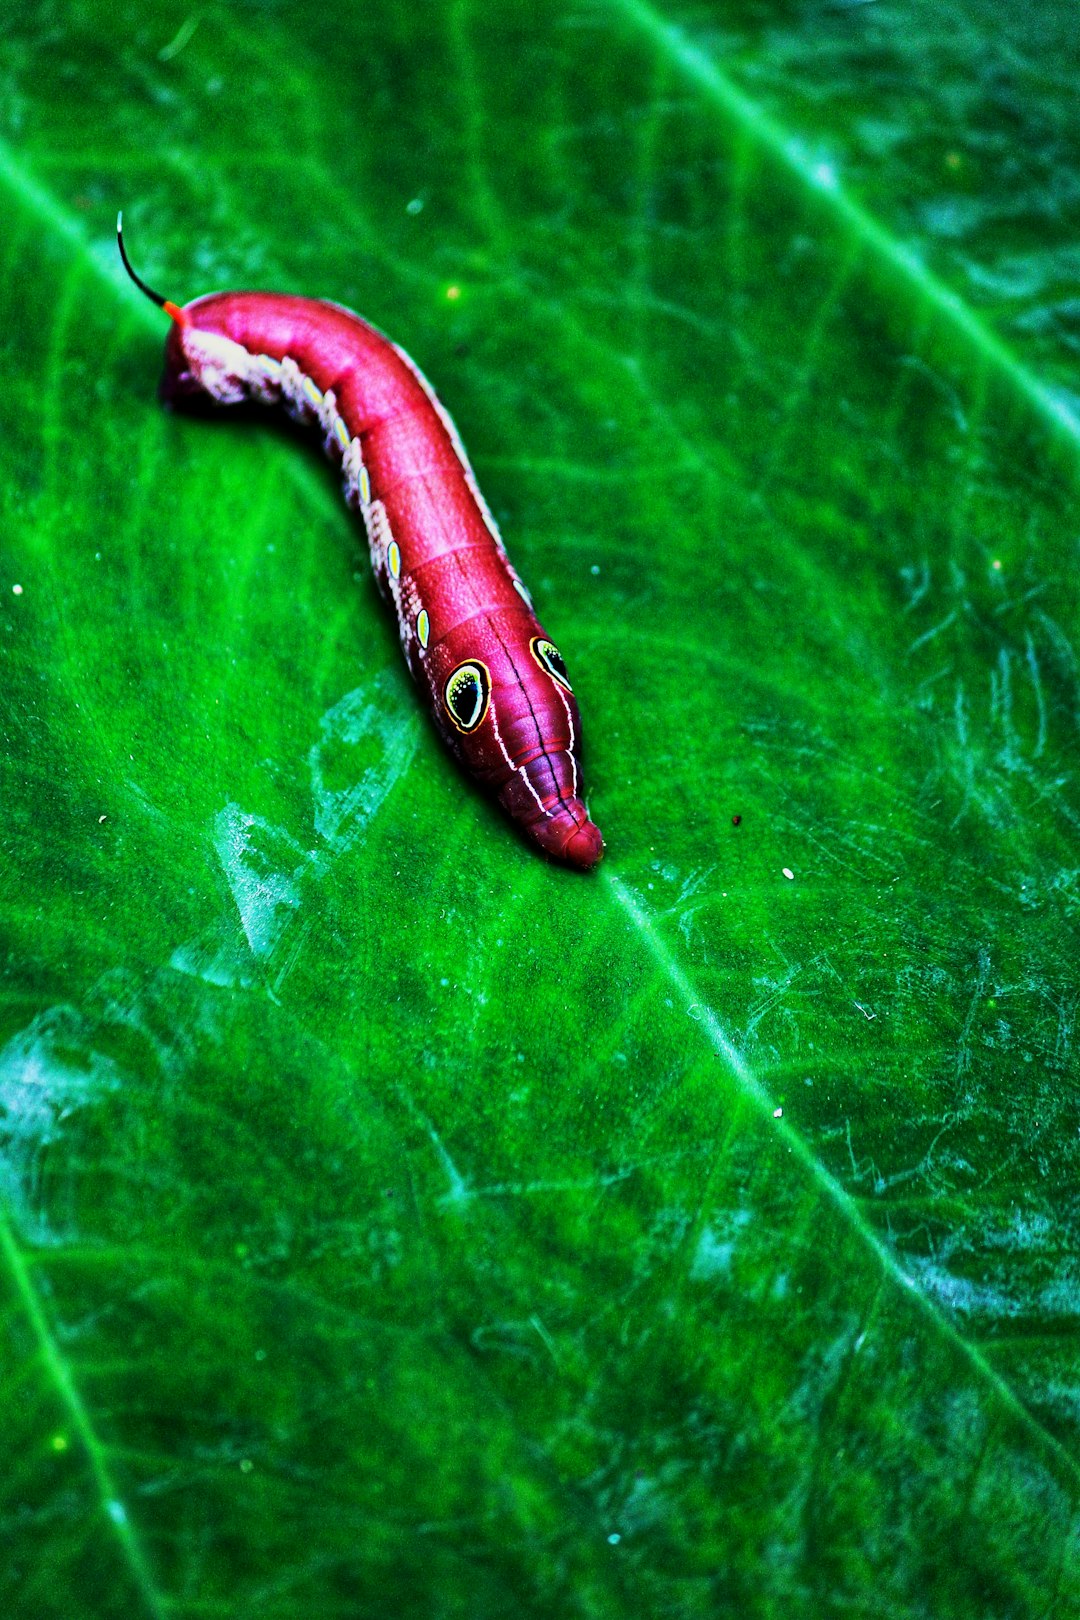 red and white caterpillar on green leaf